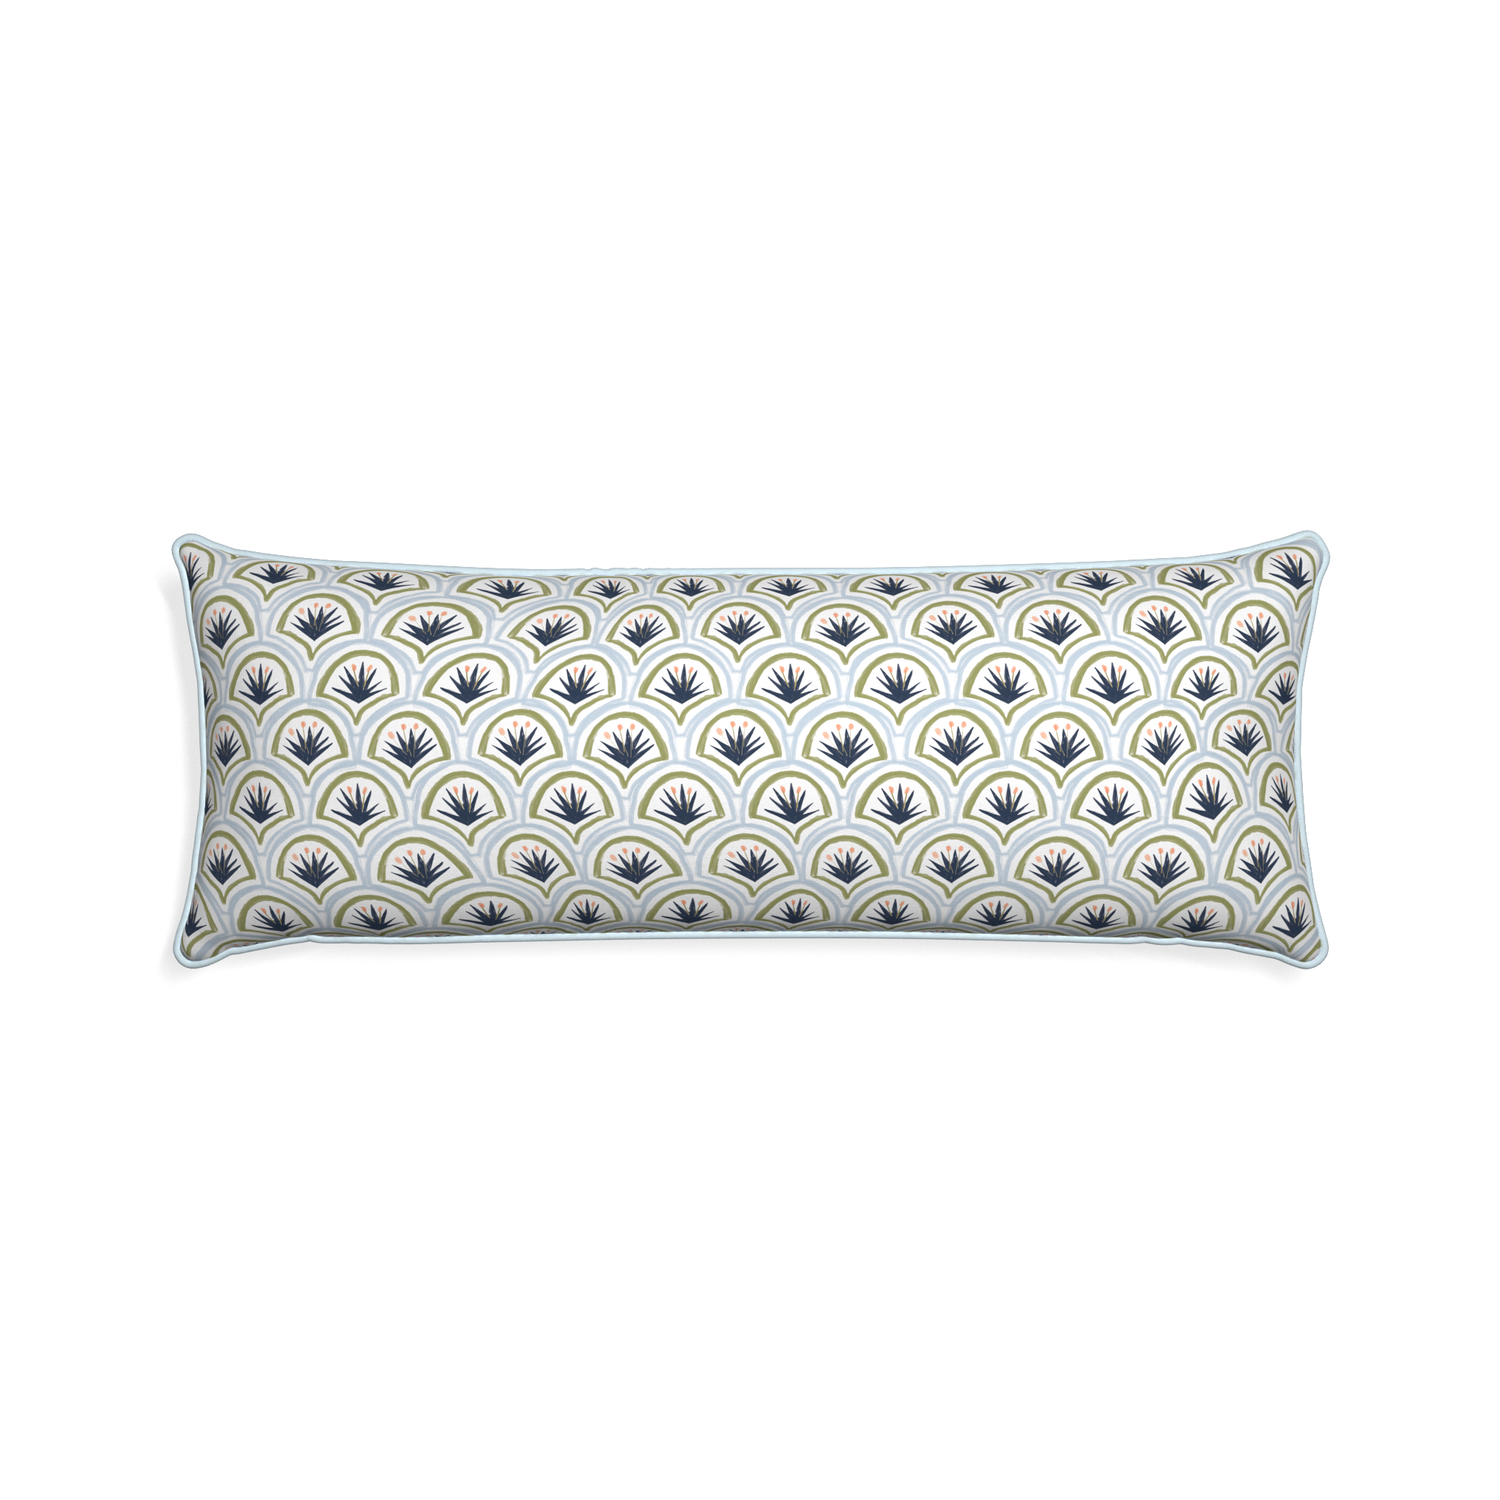 Xl-lumbar thatcher midnight custom art deco palm patternpillow with powder piping on white background